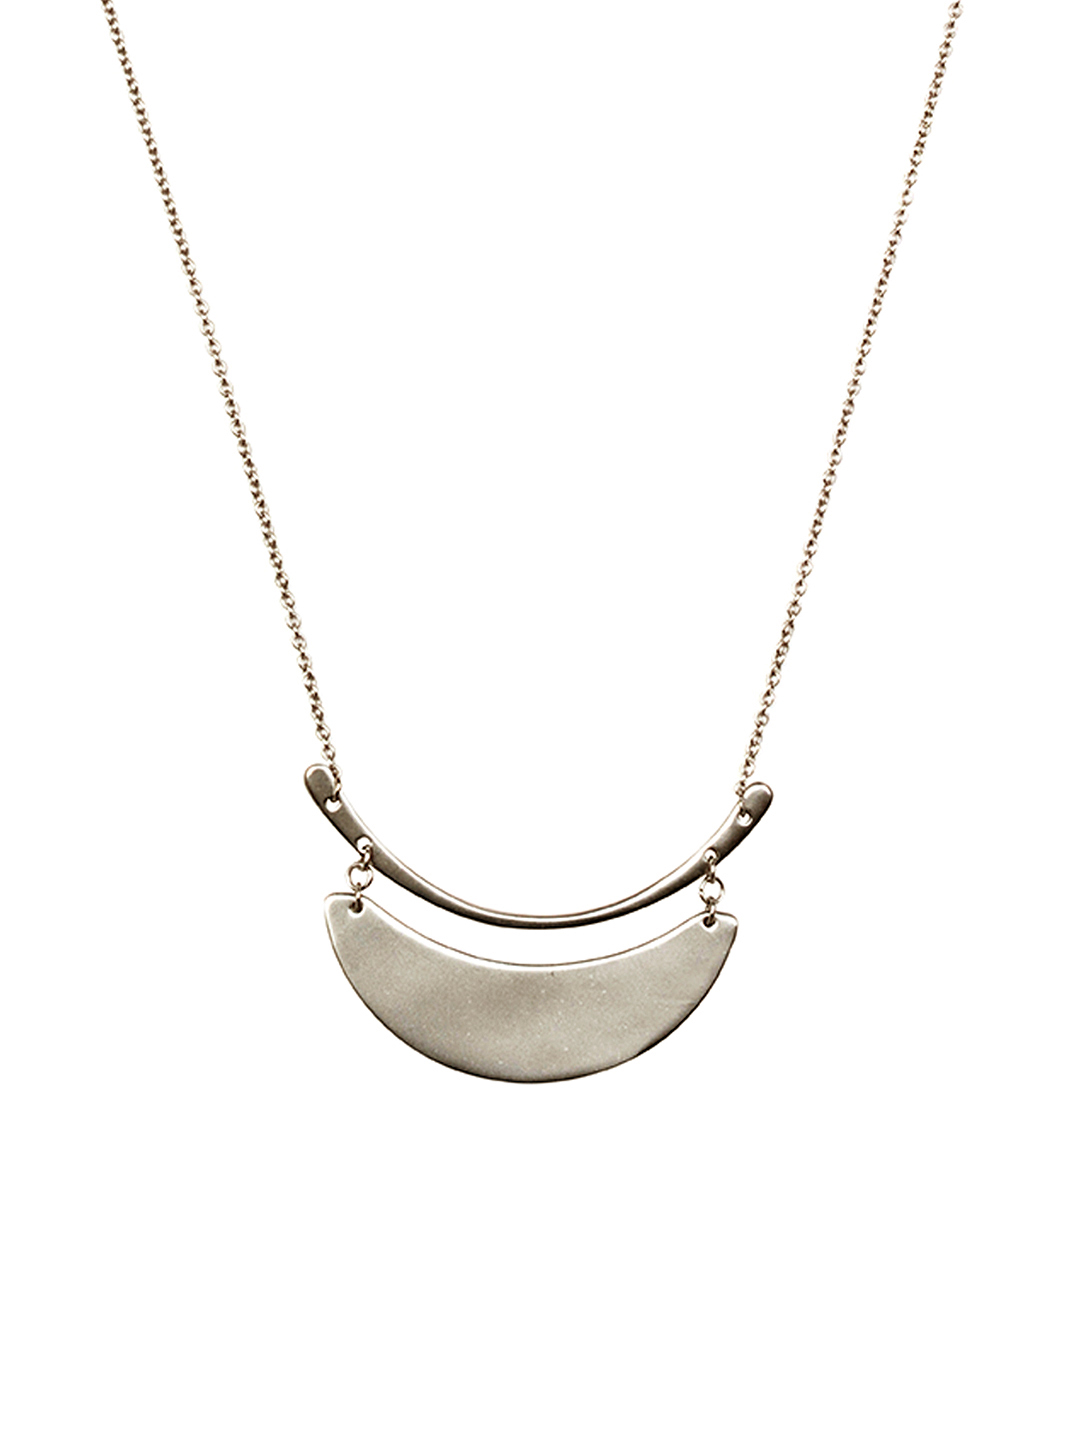 Kazo Silver-Toned Necklace